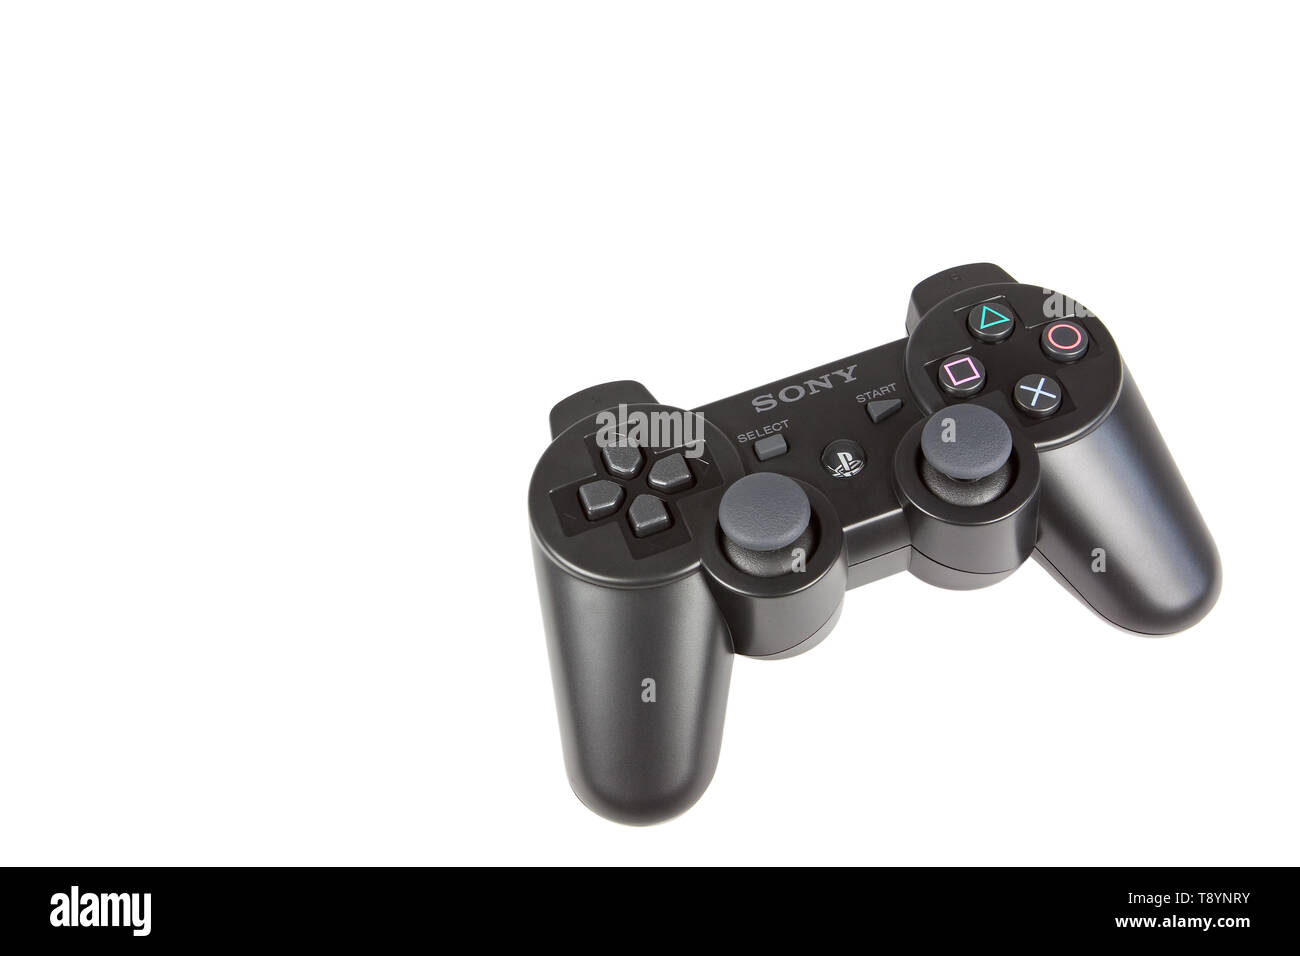 A Sony Playstation 3 PS3 games console controller Stock Photo - Alamy